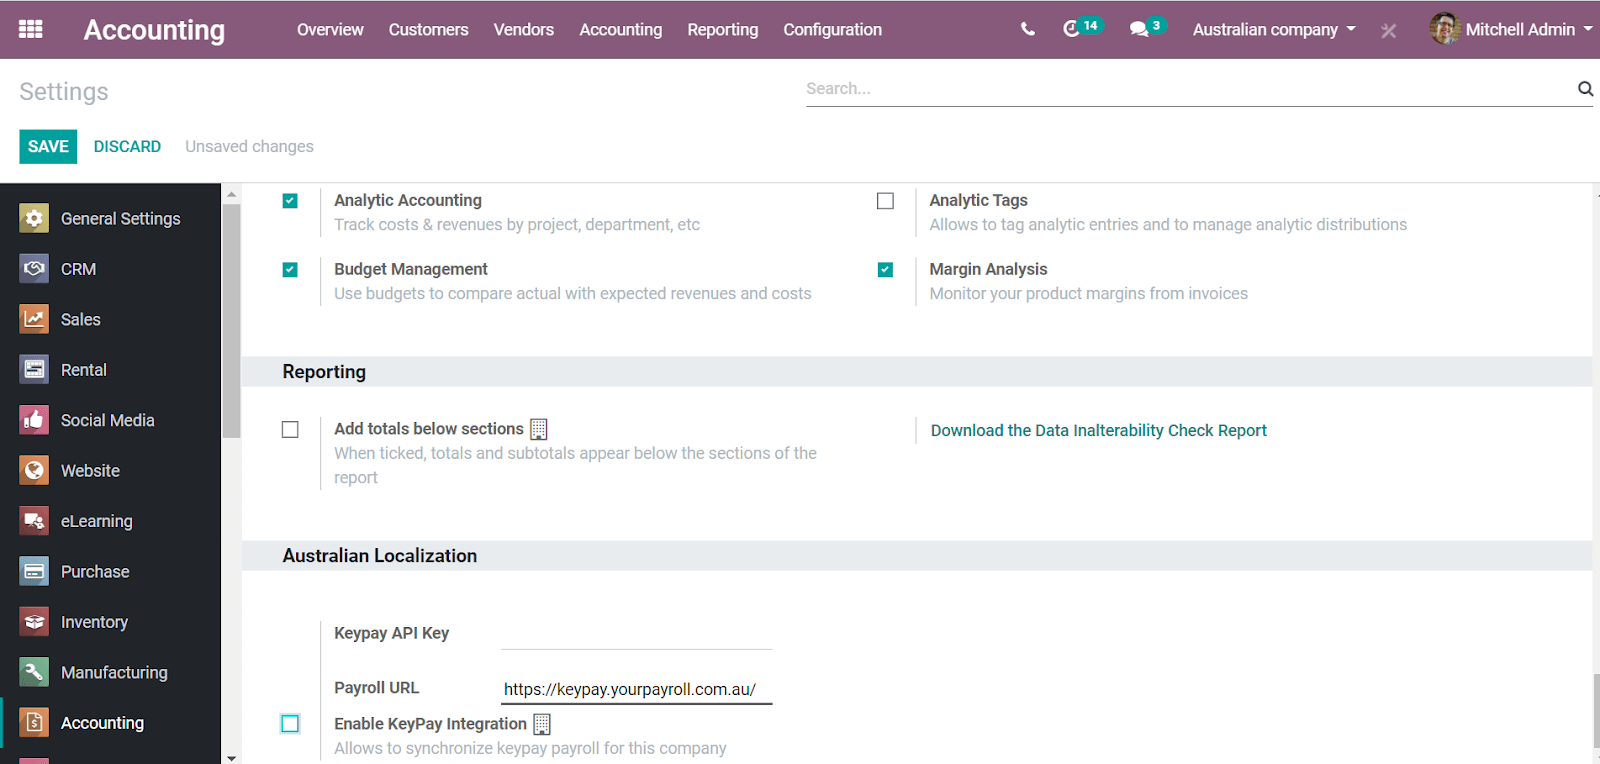 Flectra Accounting settings includes a section for the Australian Loclization